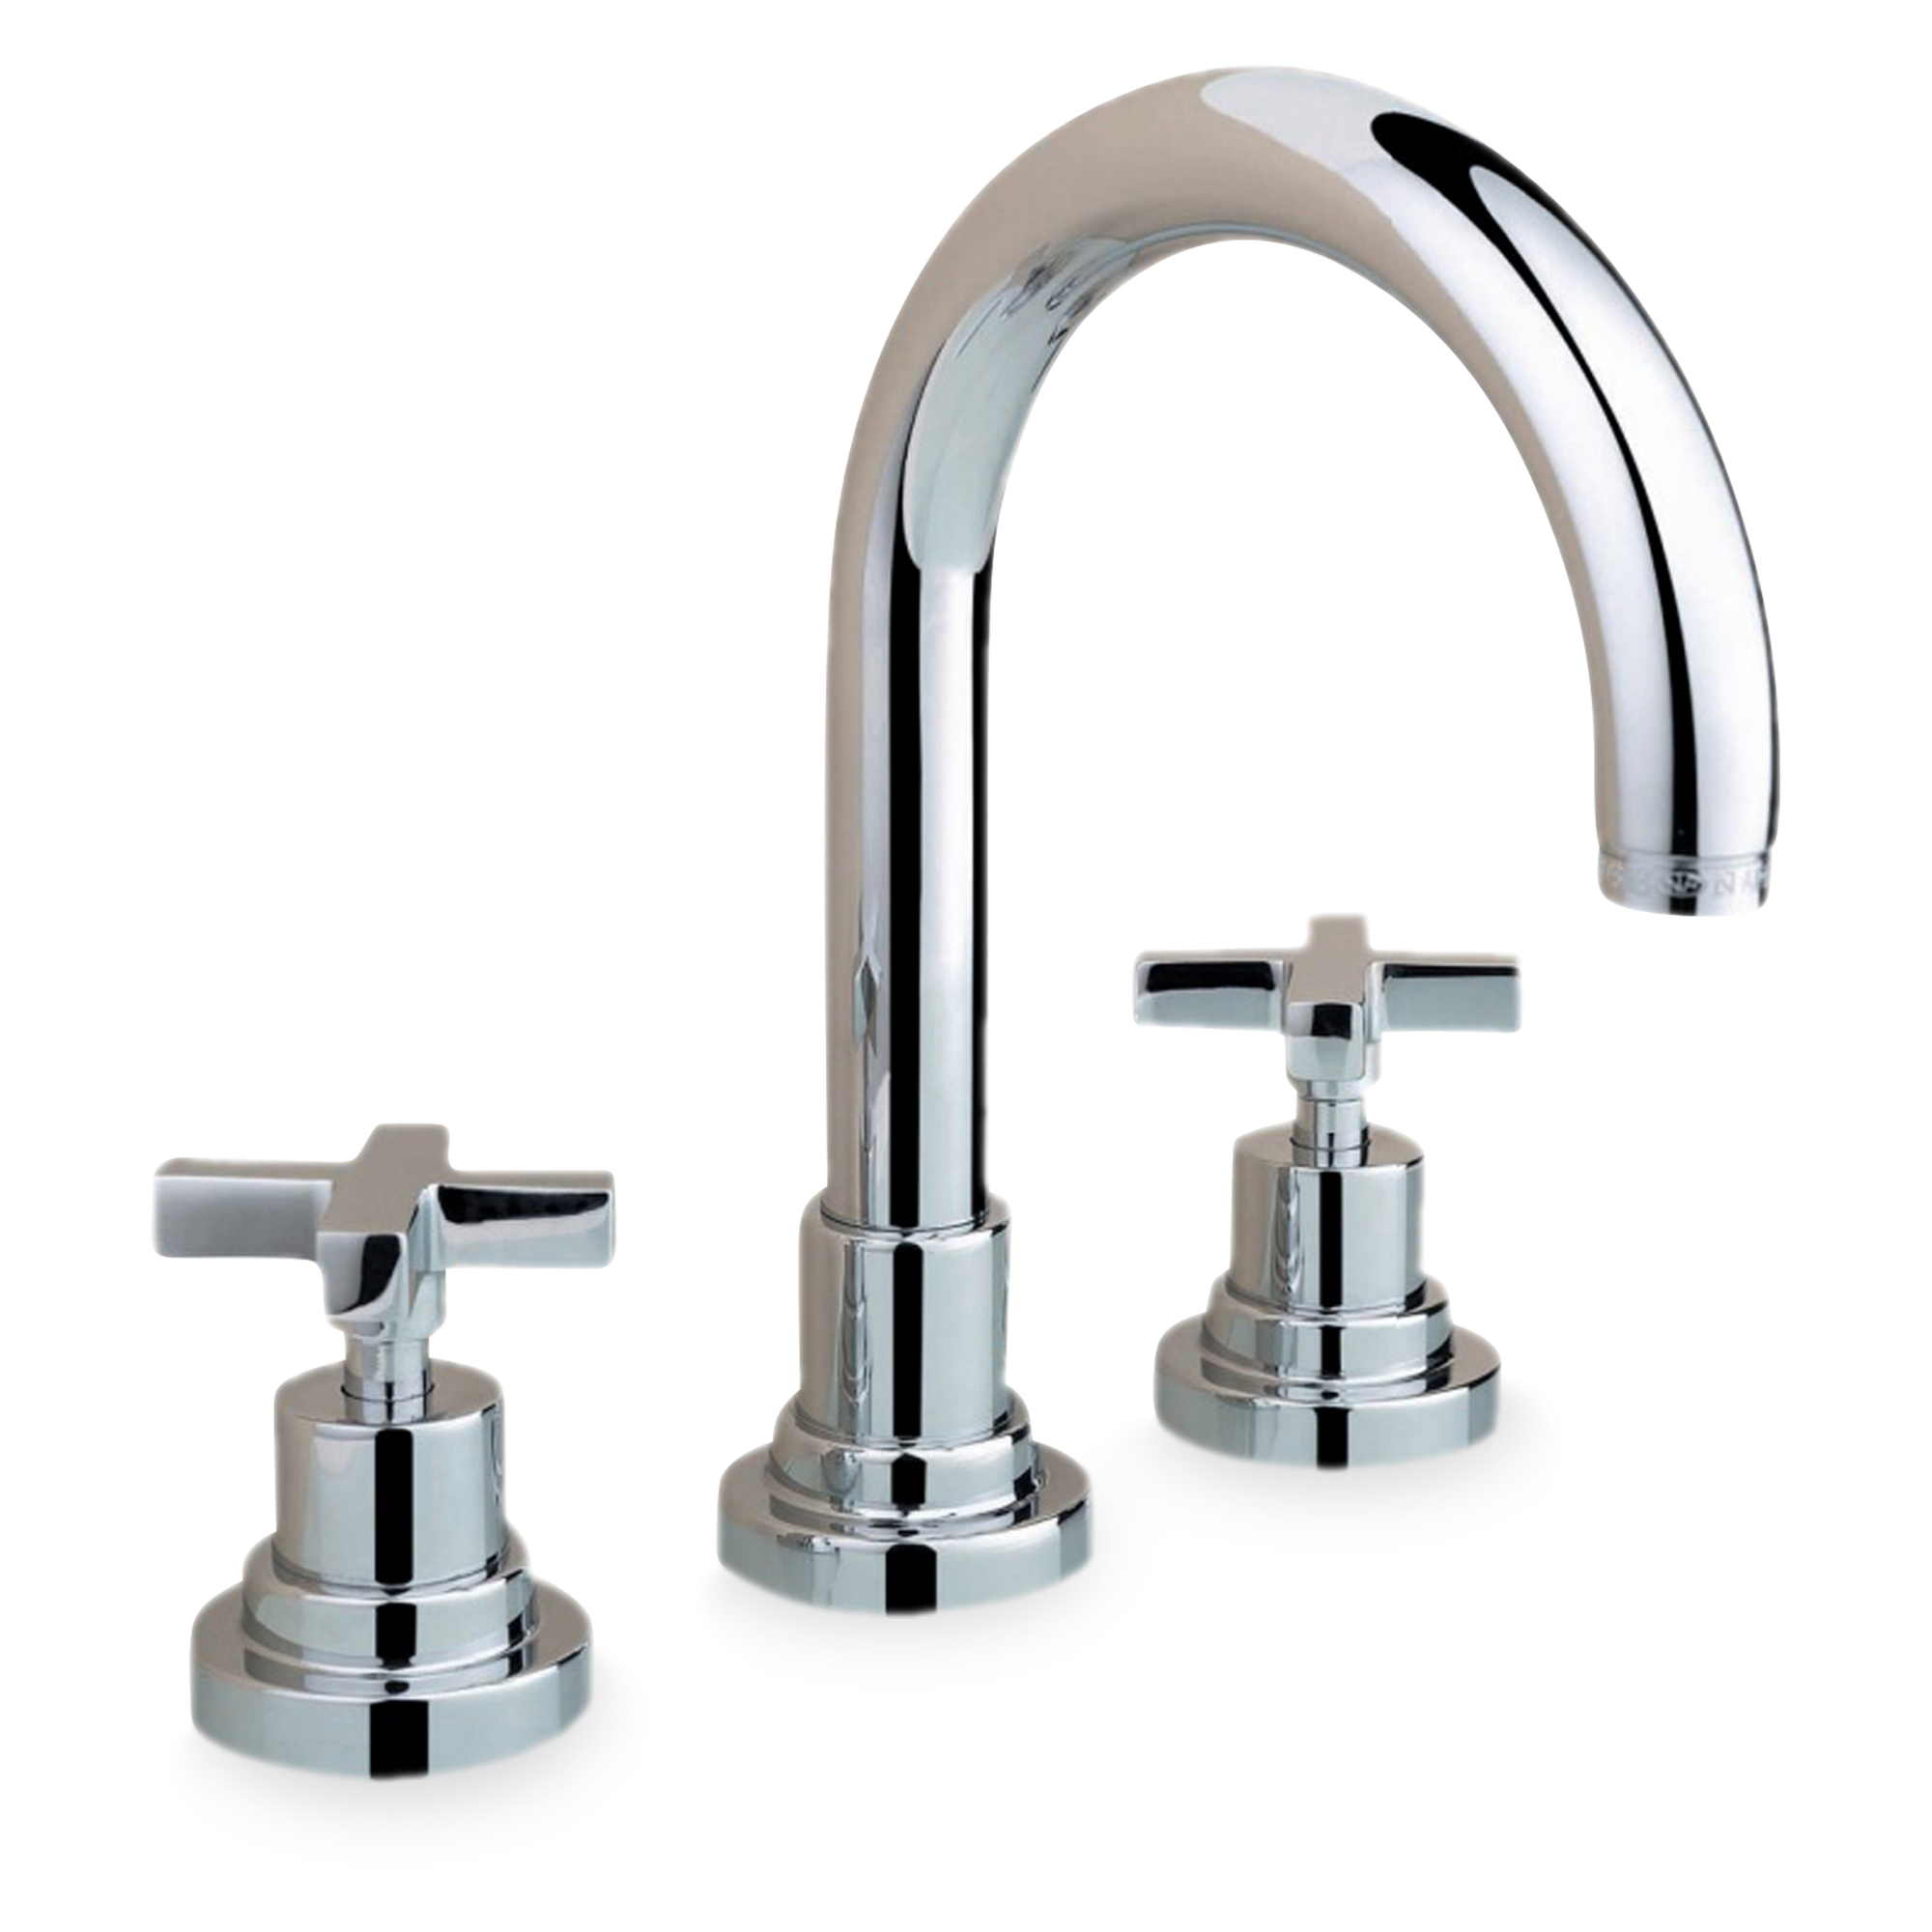 The Avenue X Faucet (Gooseneck) is a basin faucet featuring two croass handels.